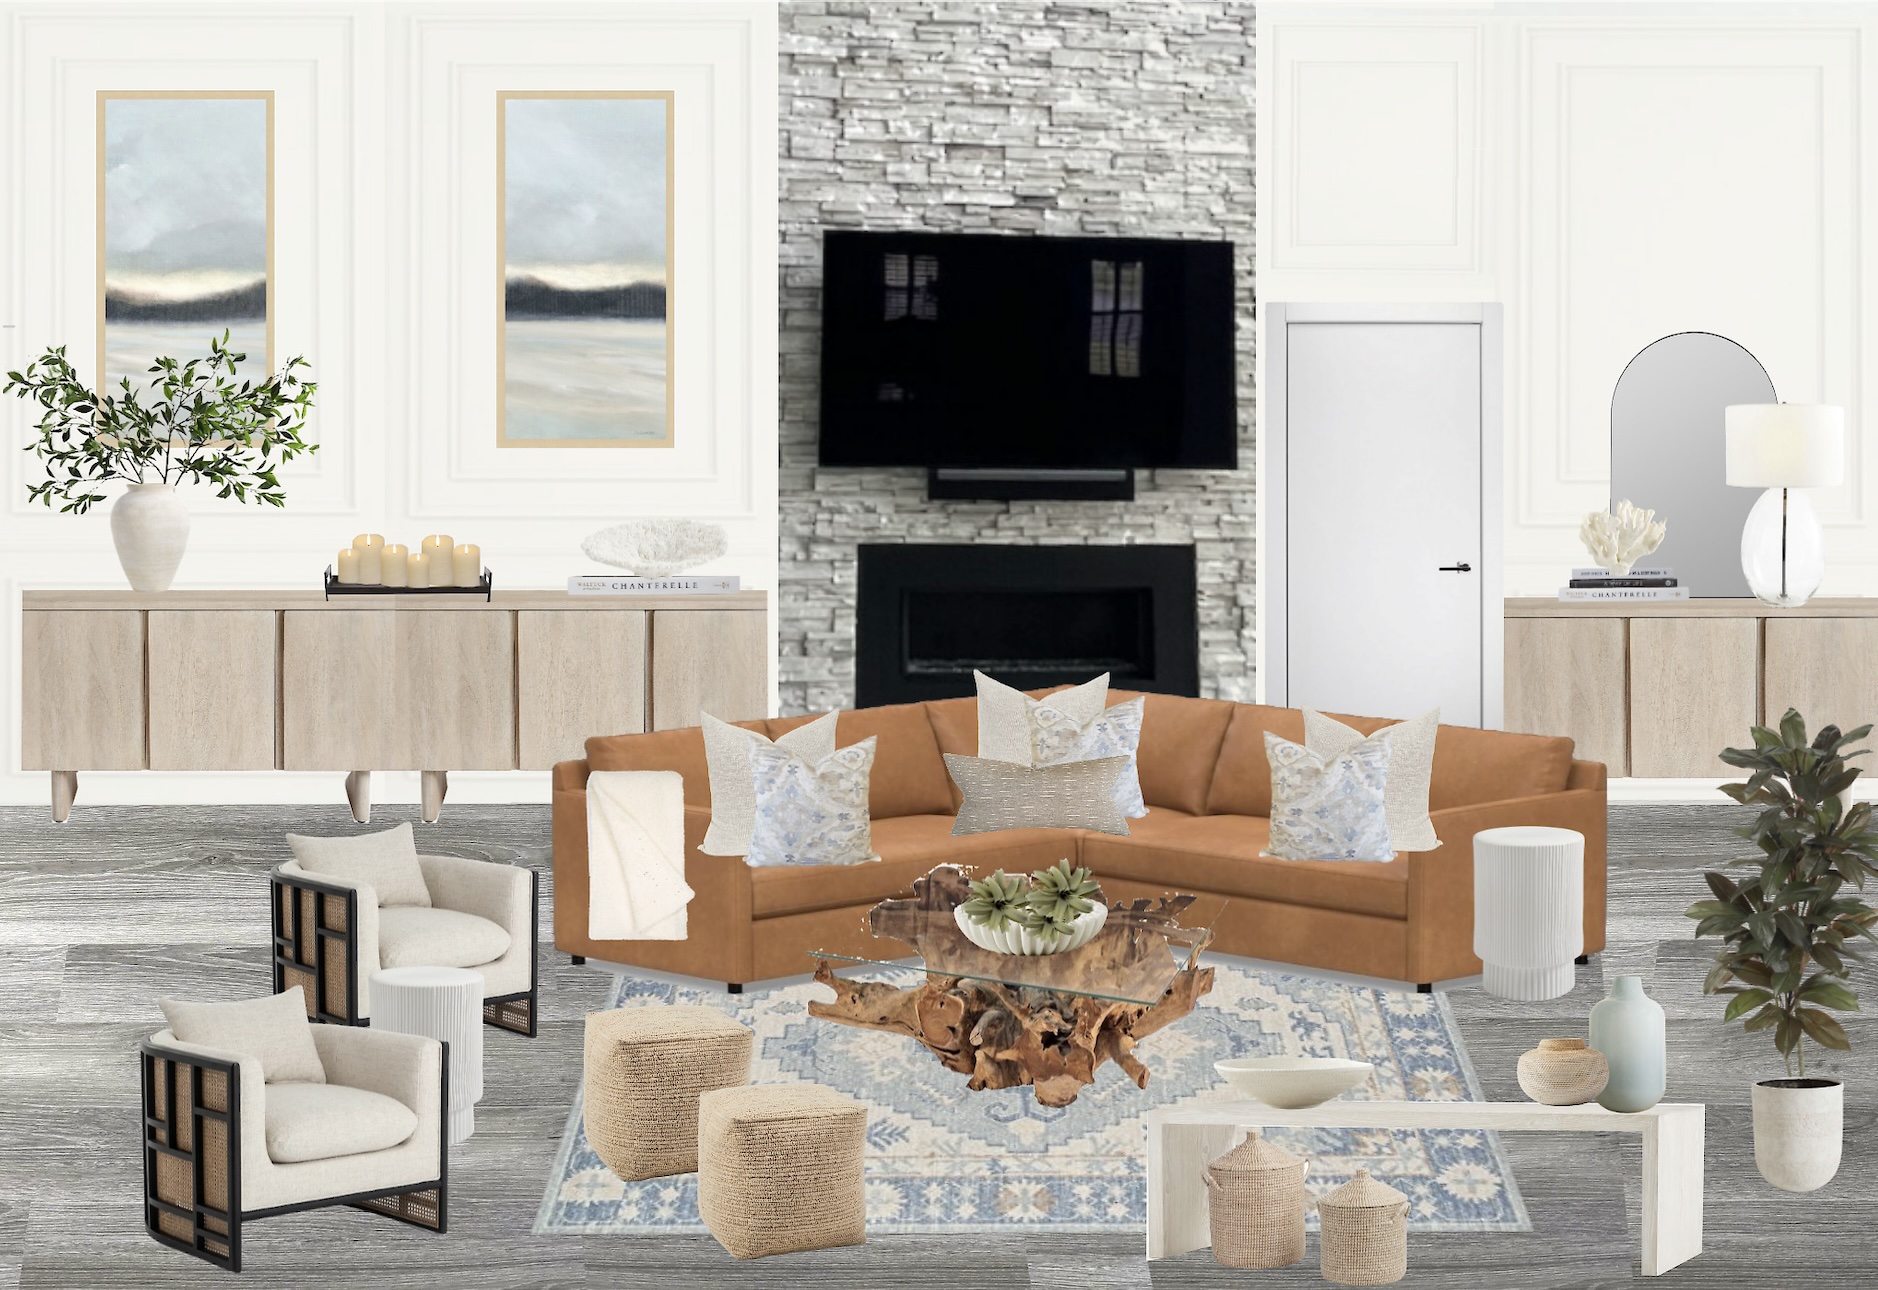 Welcome Home Styling created this Living Room digital design board for a client who wanted to freshen up the interior design of their living room.